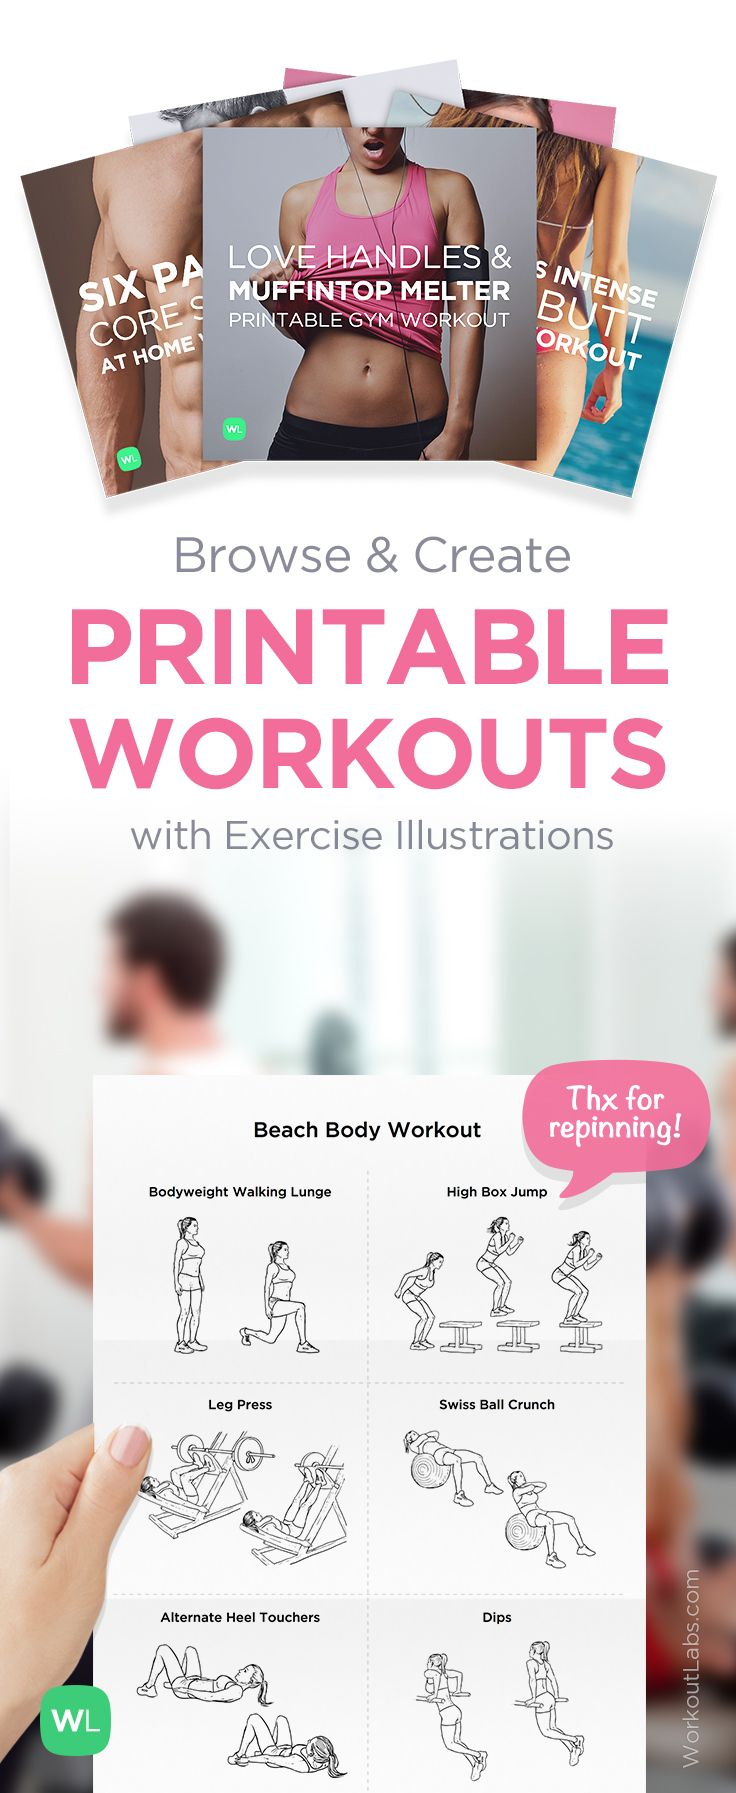 Free Printable Routines, Workout Packs And Exercise Programs - Free Printable Gym Workout Plans